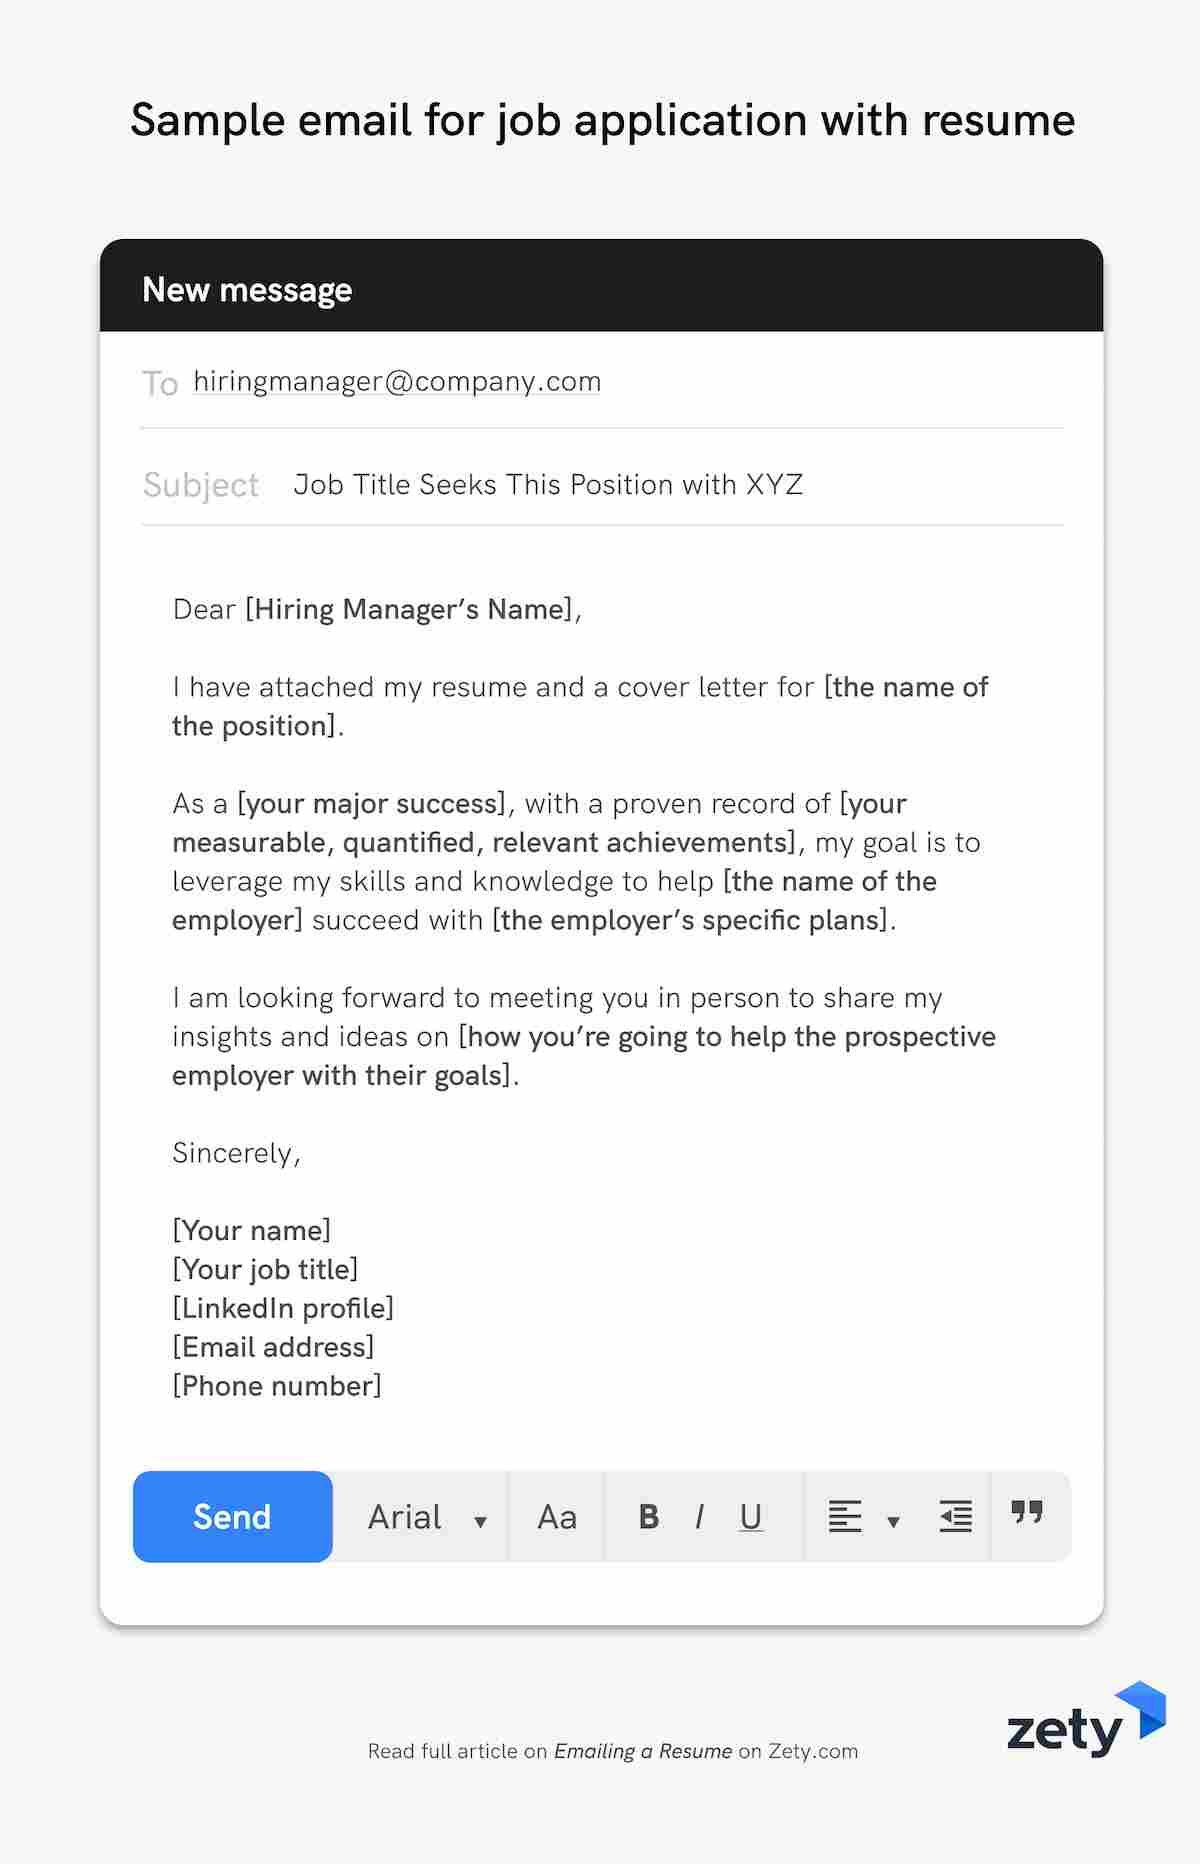 Sample Email to Send Resume and Cover Letter to Recruiter How to Email A Resume to An Employer: 12lancarrezekiq Email Examples